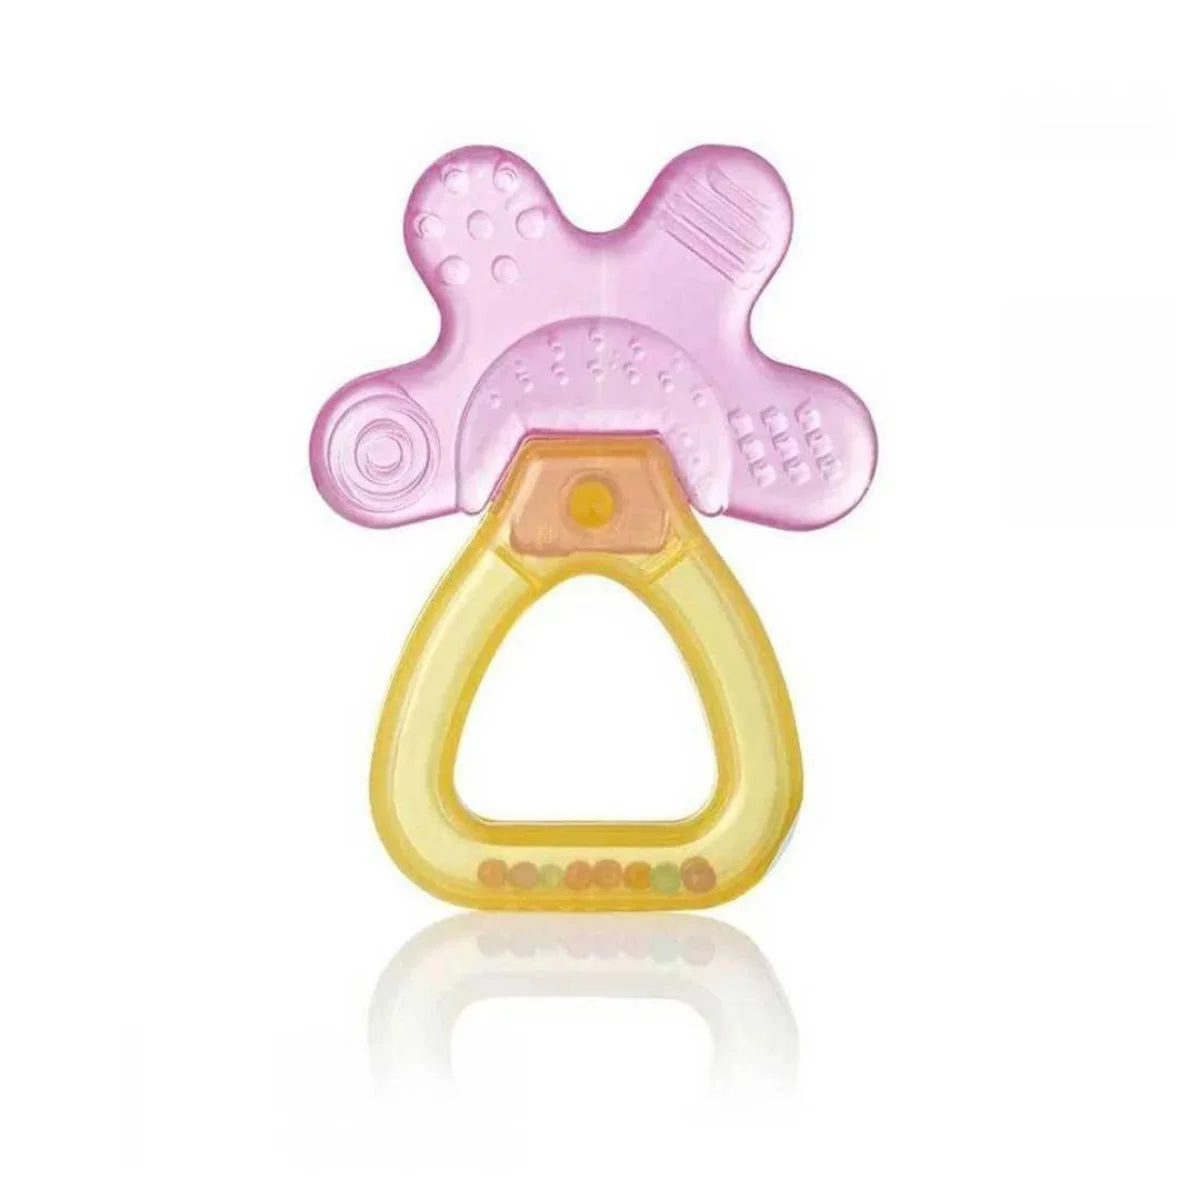 Pink and yellow rattle and baby teether for babies